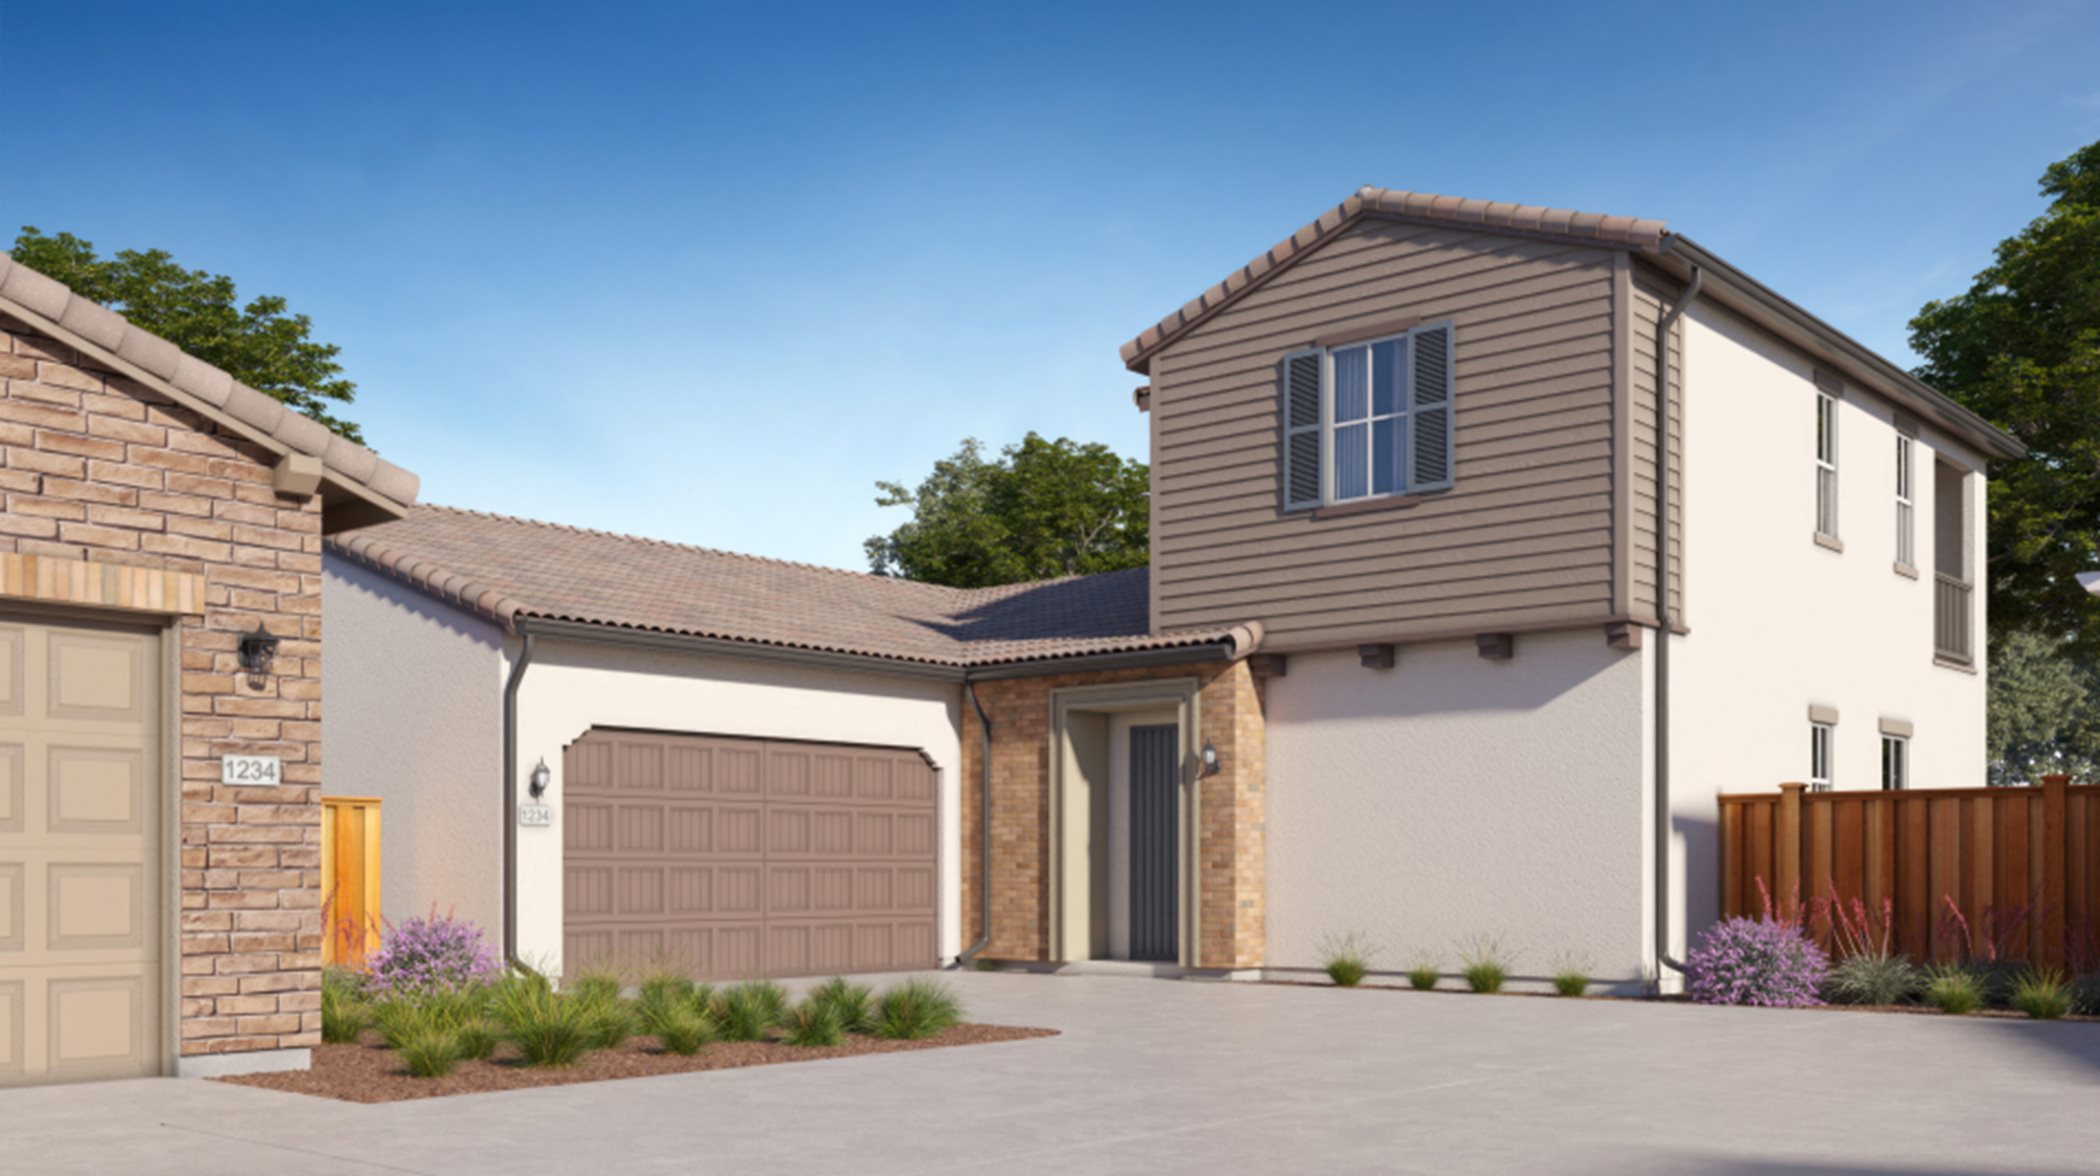 Spanish Ranch home exterior image